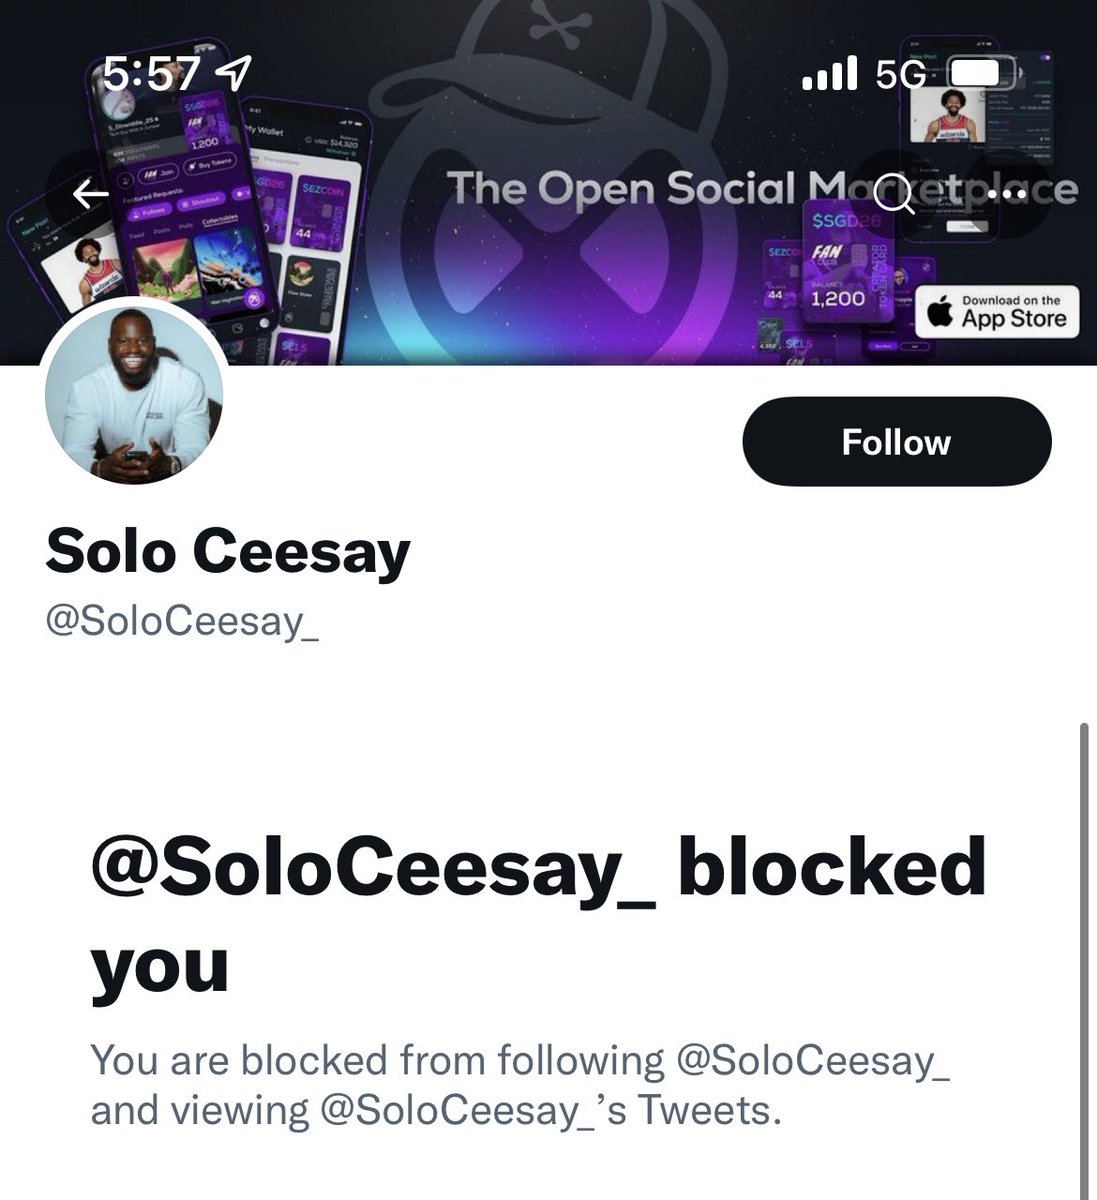 ⚠️ WARNING ⚠️ hey @hedera fam, it looks like there’s an account impersonating me (@soloceesay_) please report them and be weary of anything they post (don’t click any links)